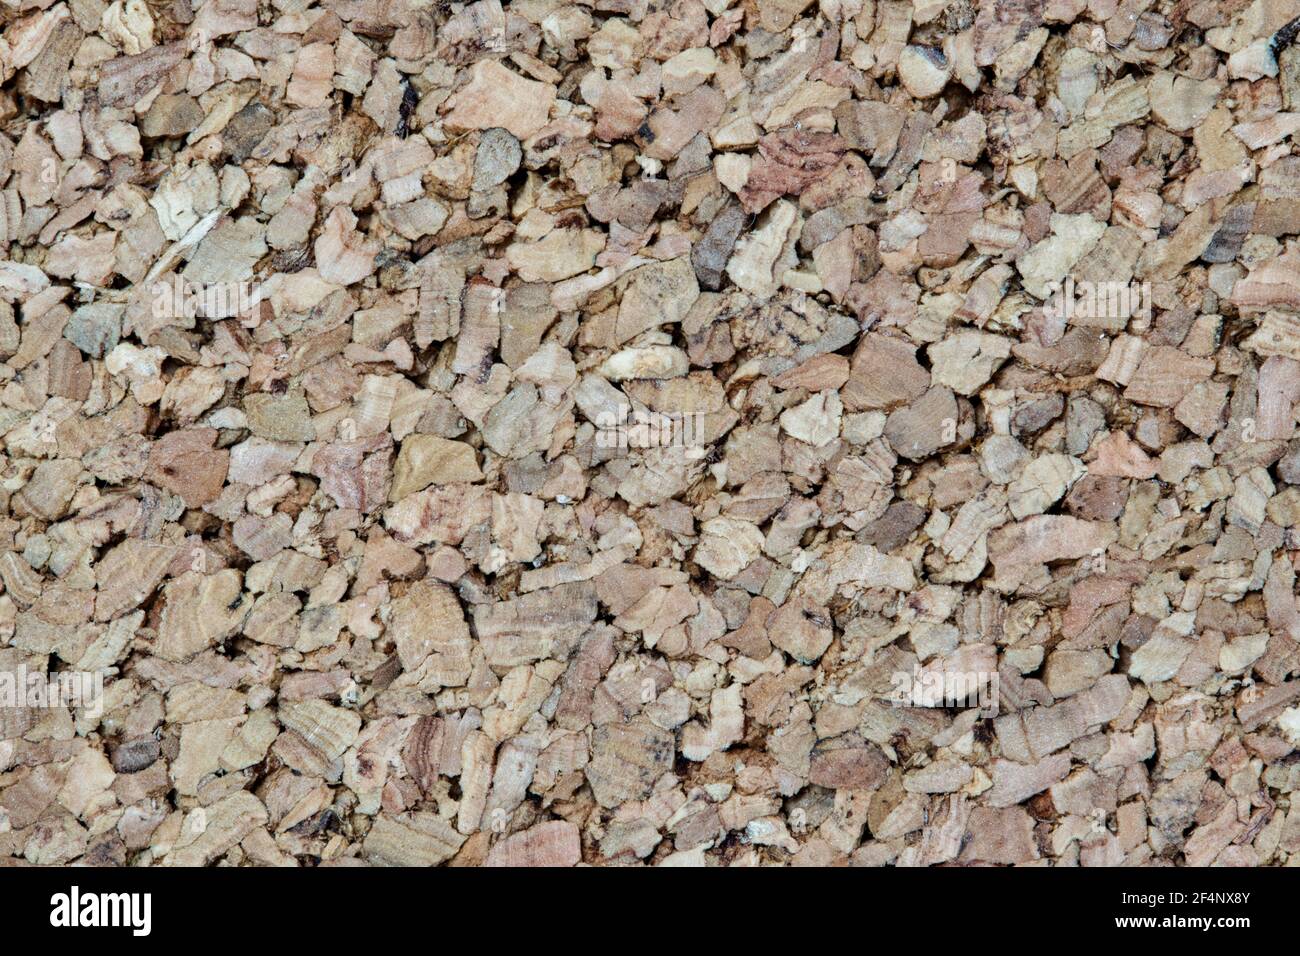 Corkwood background macro detailed image. Buoyant material from the Cork Oak tree (Quercus suber) that is used for a number of applications. Stock Photo